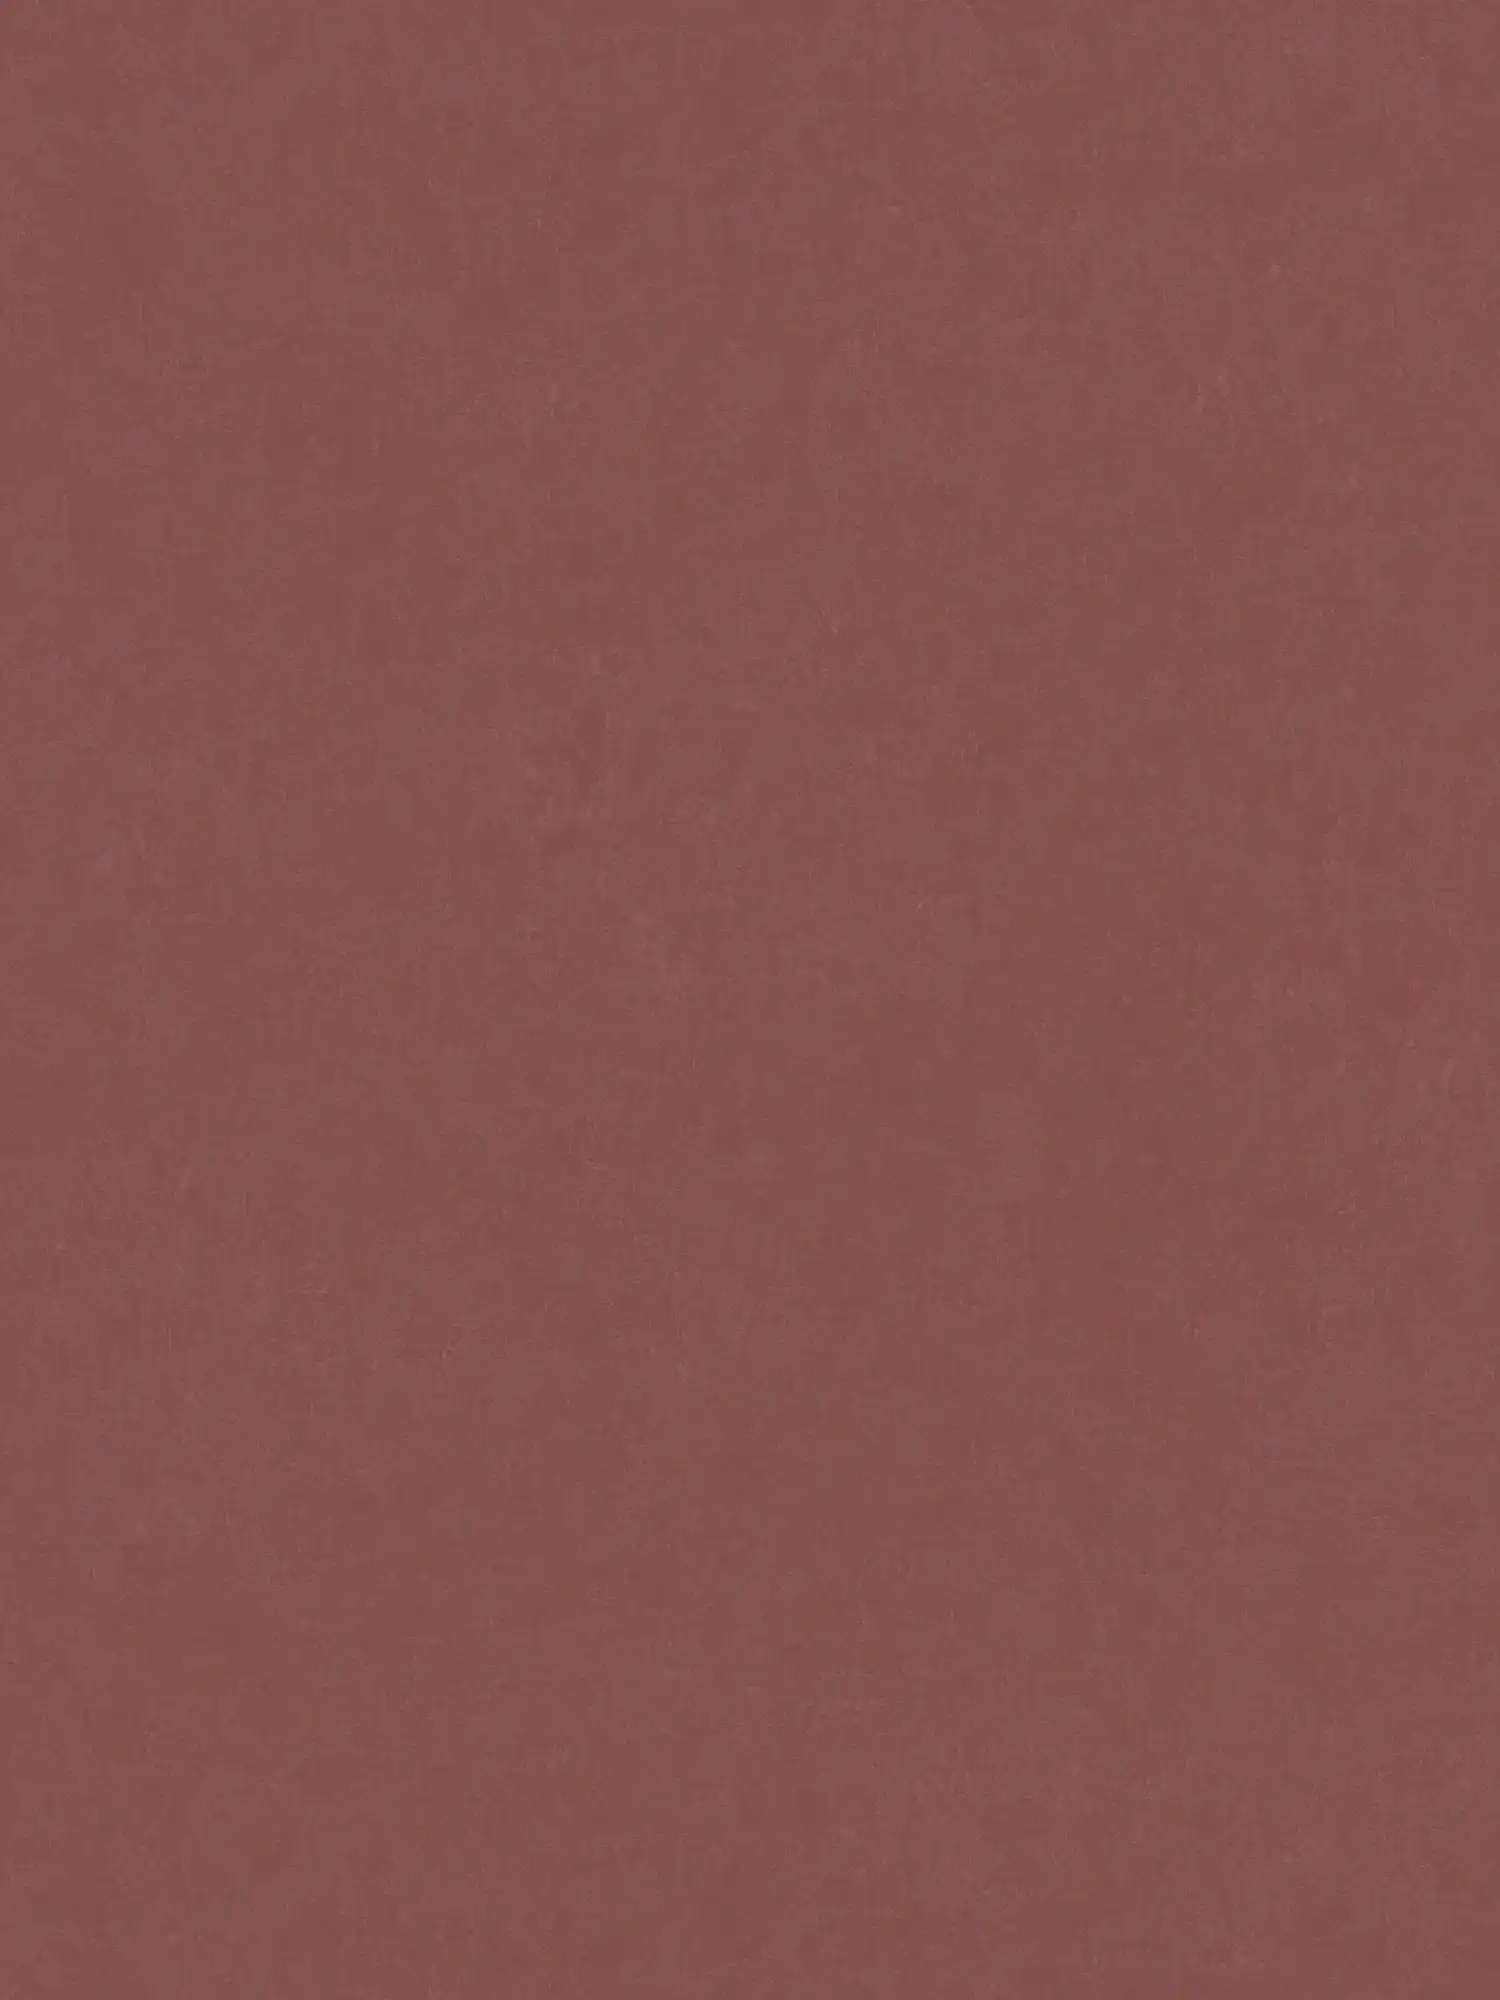 Wine red wallpaper plain with texture design - red
